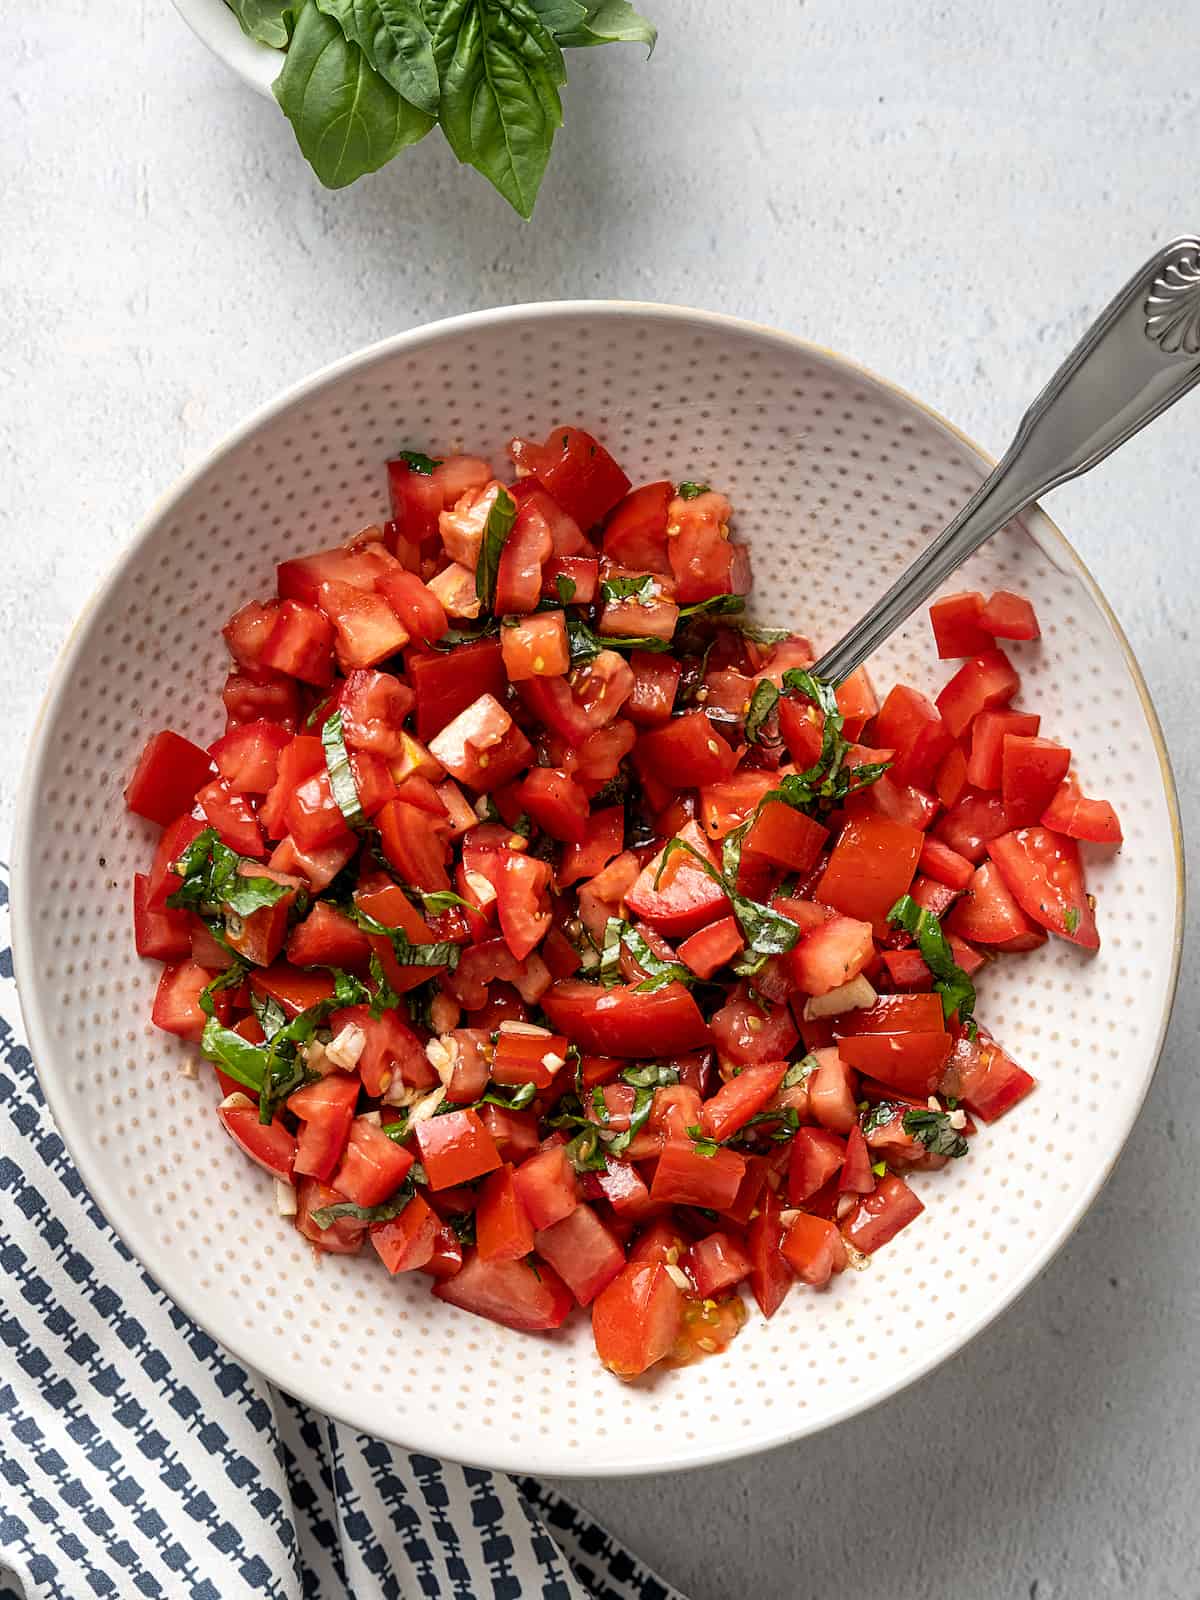 A mixture of diced tomato, chopped basil and minced garlic in a bowl with a spoon.